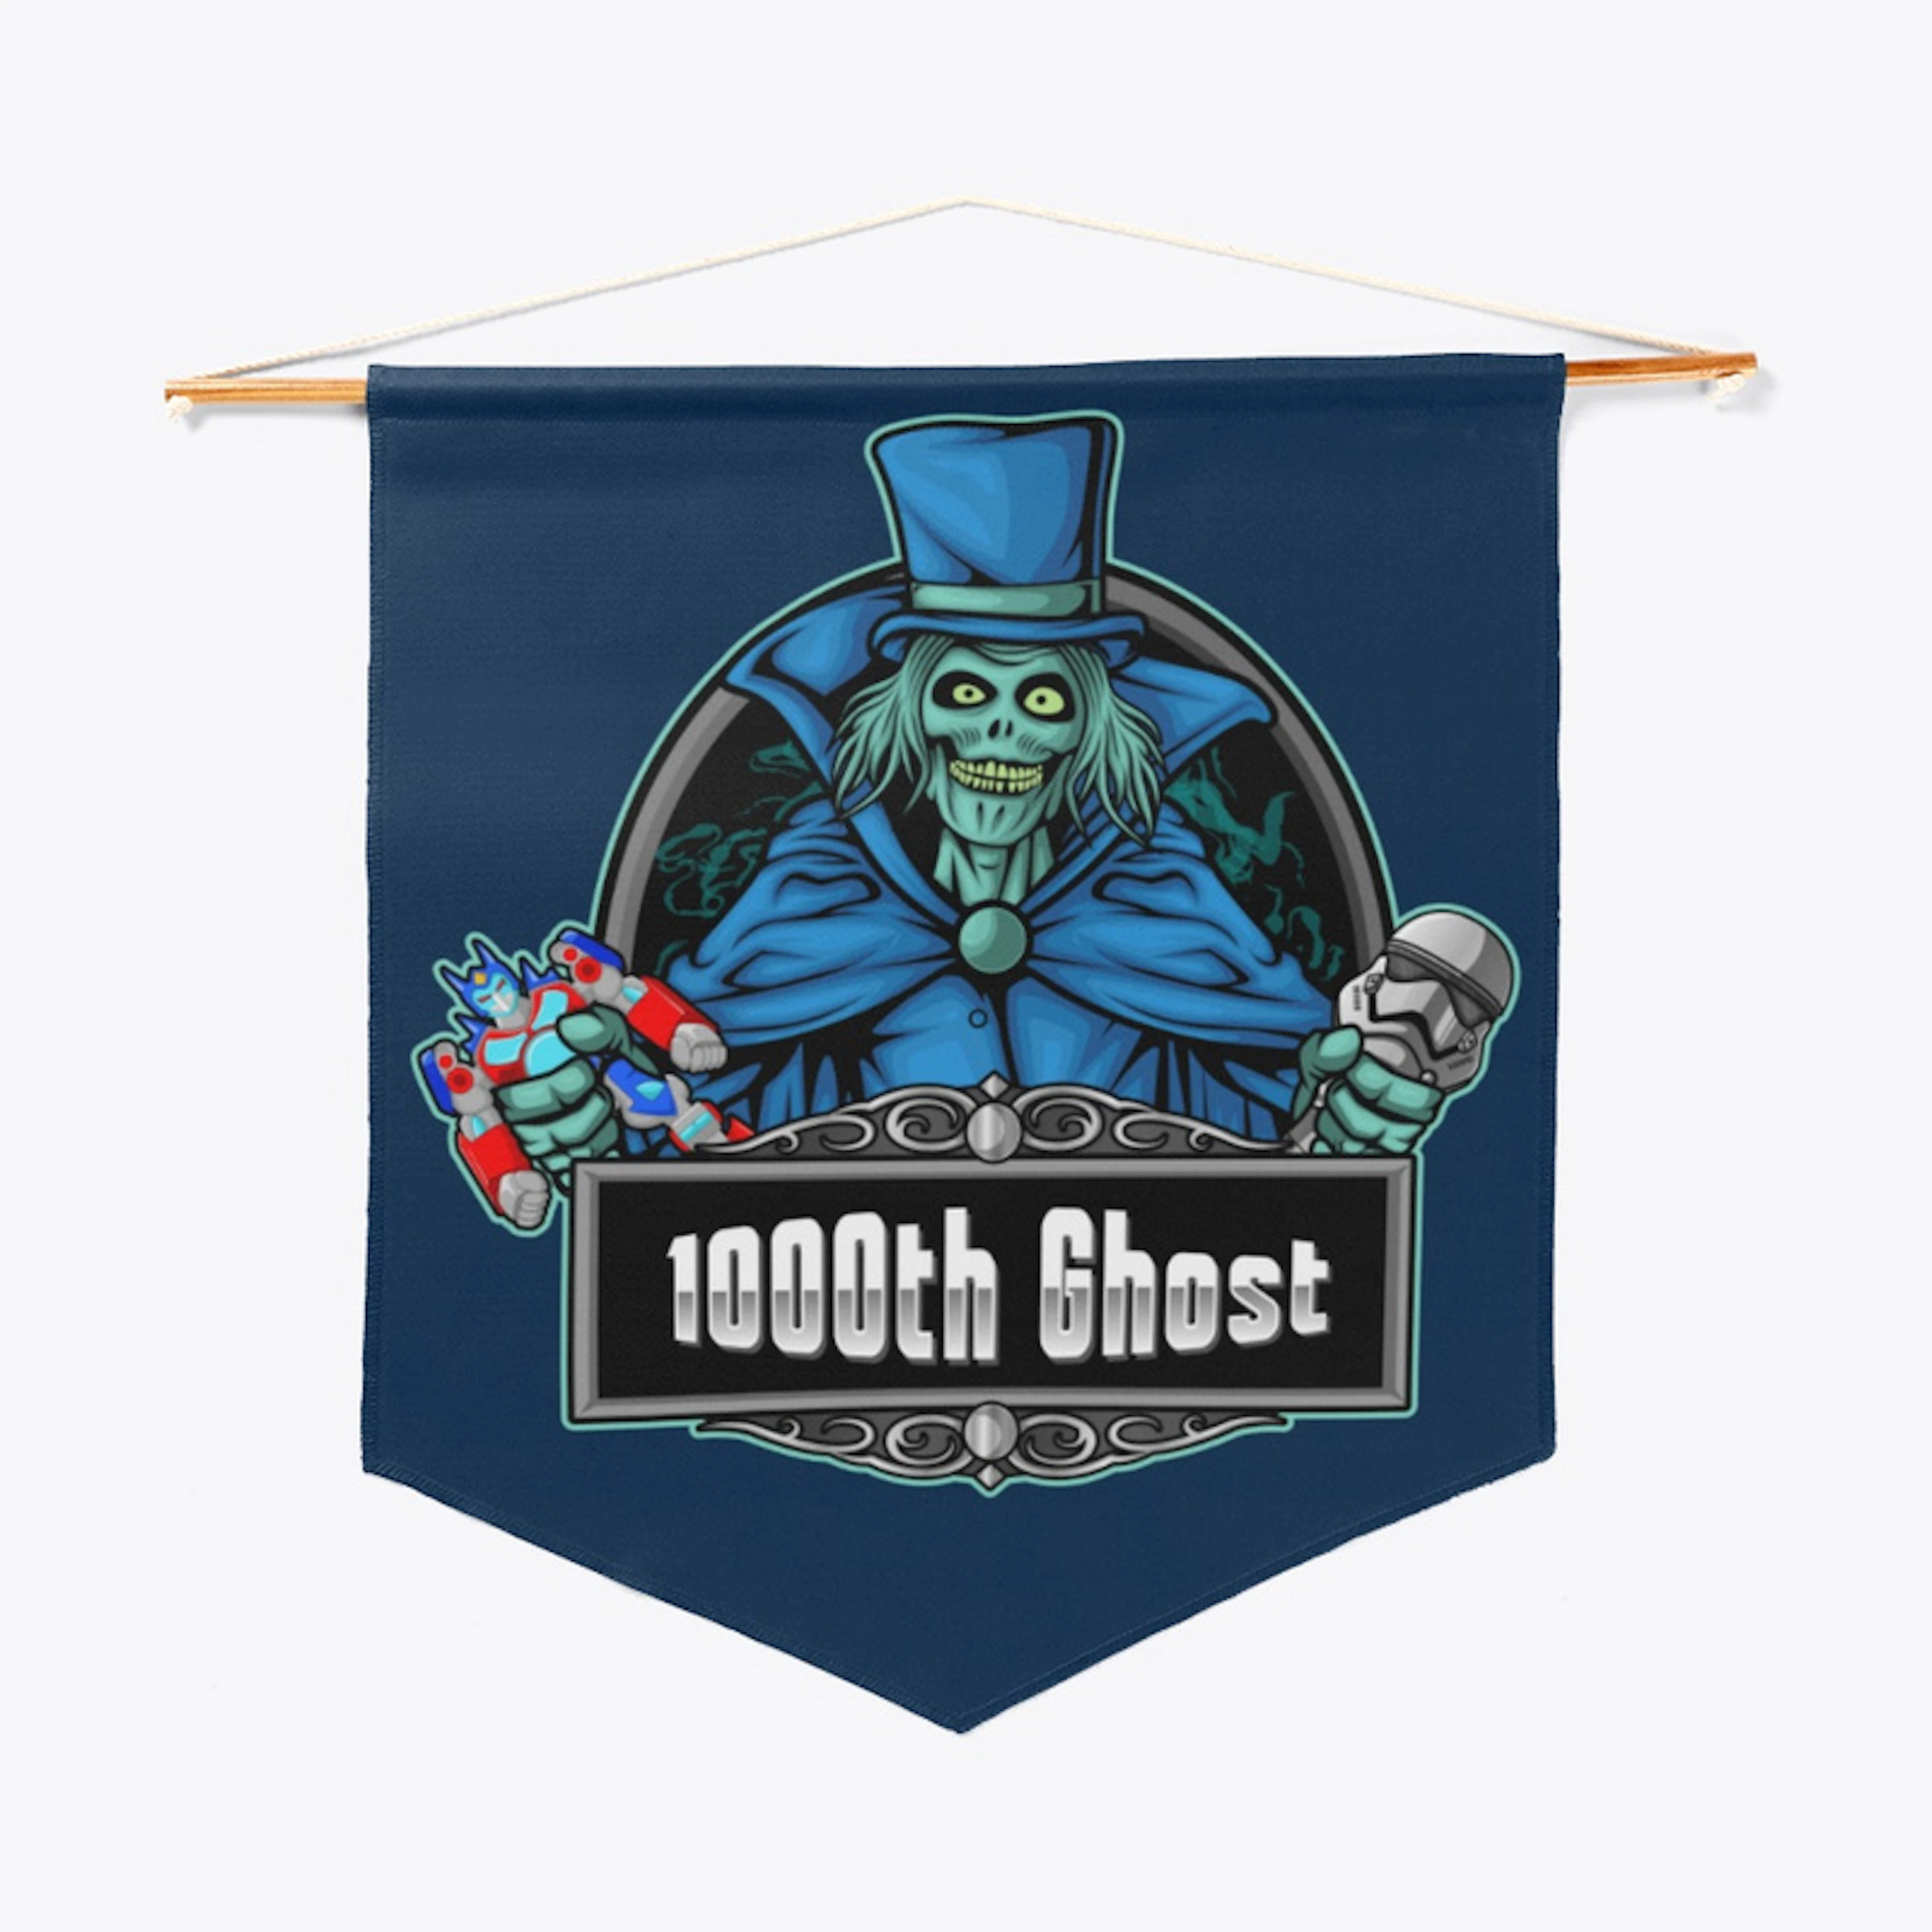 1000th Ghost